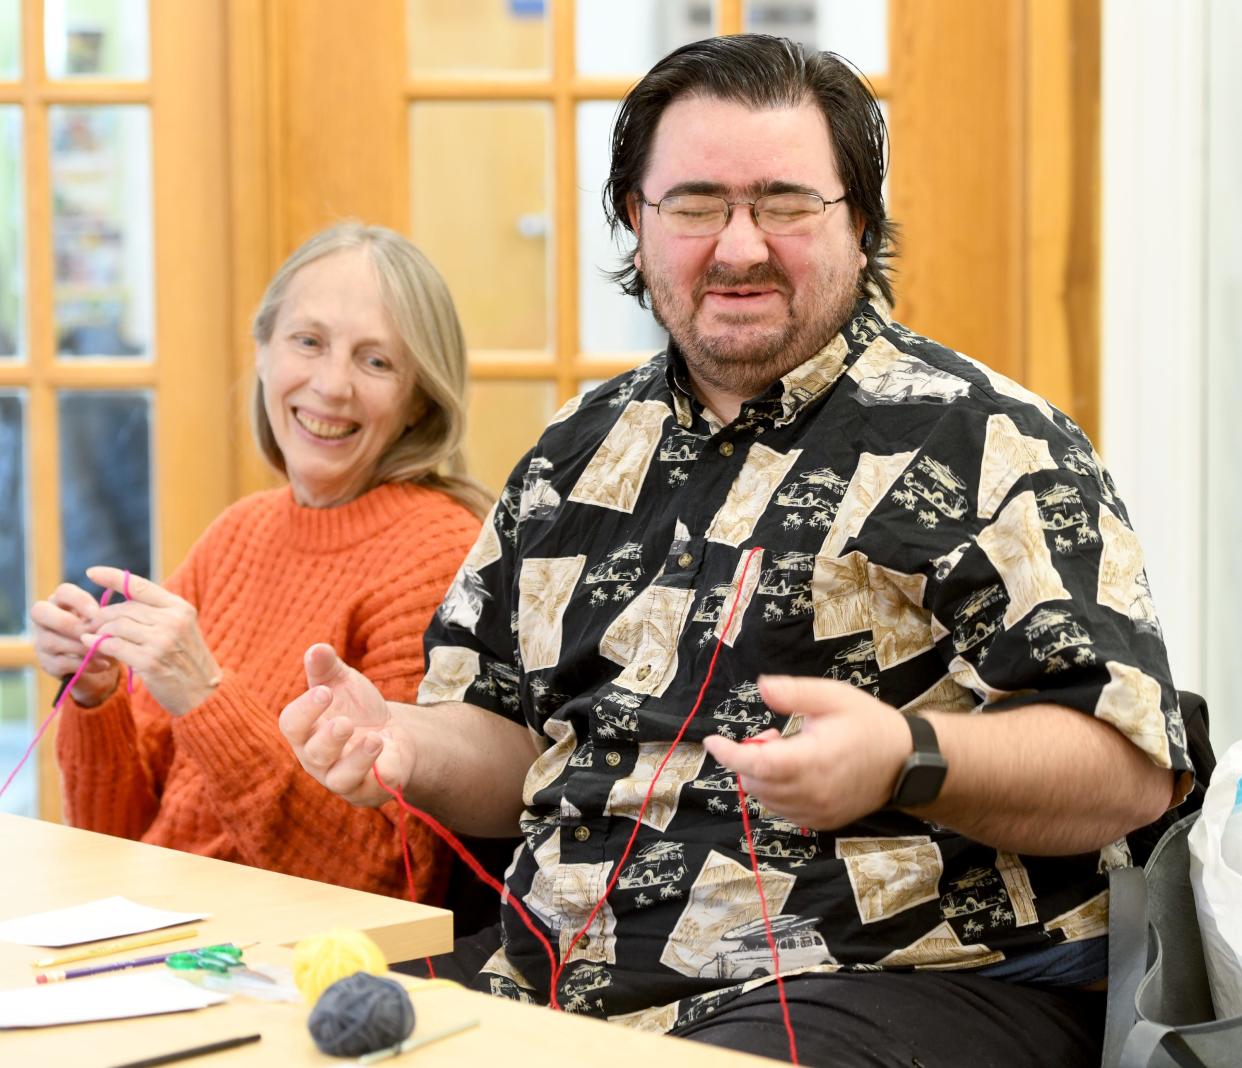 Ronnie Shaneyfelt II of Canton gets wound up as his aunt Linda Ward of Canton looks on during the Knitting and Crochet Club gathering at the Stark Library's DeHoff Memorial Branch in Canton.